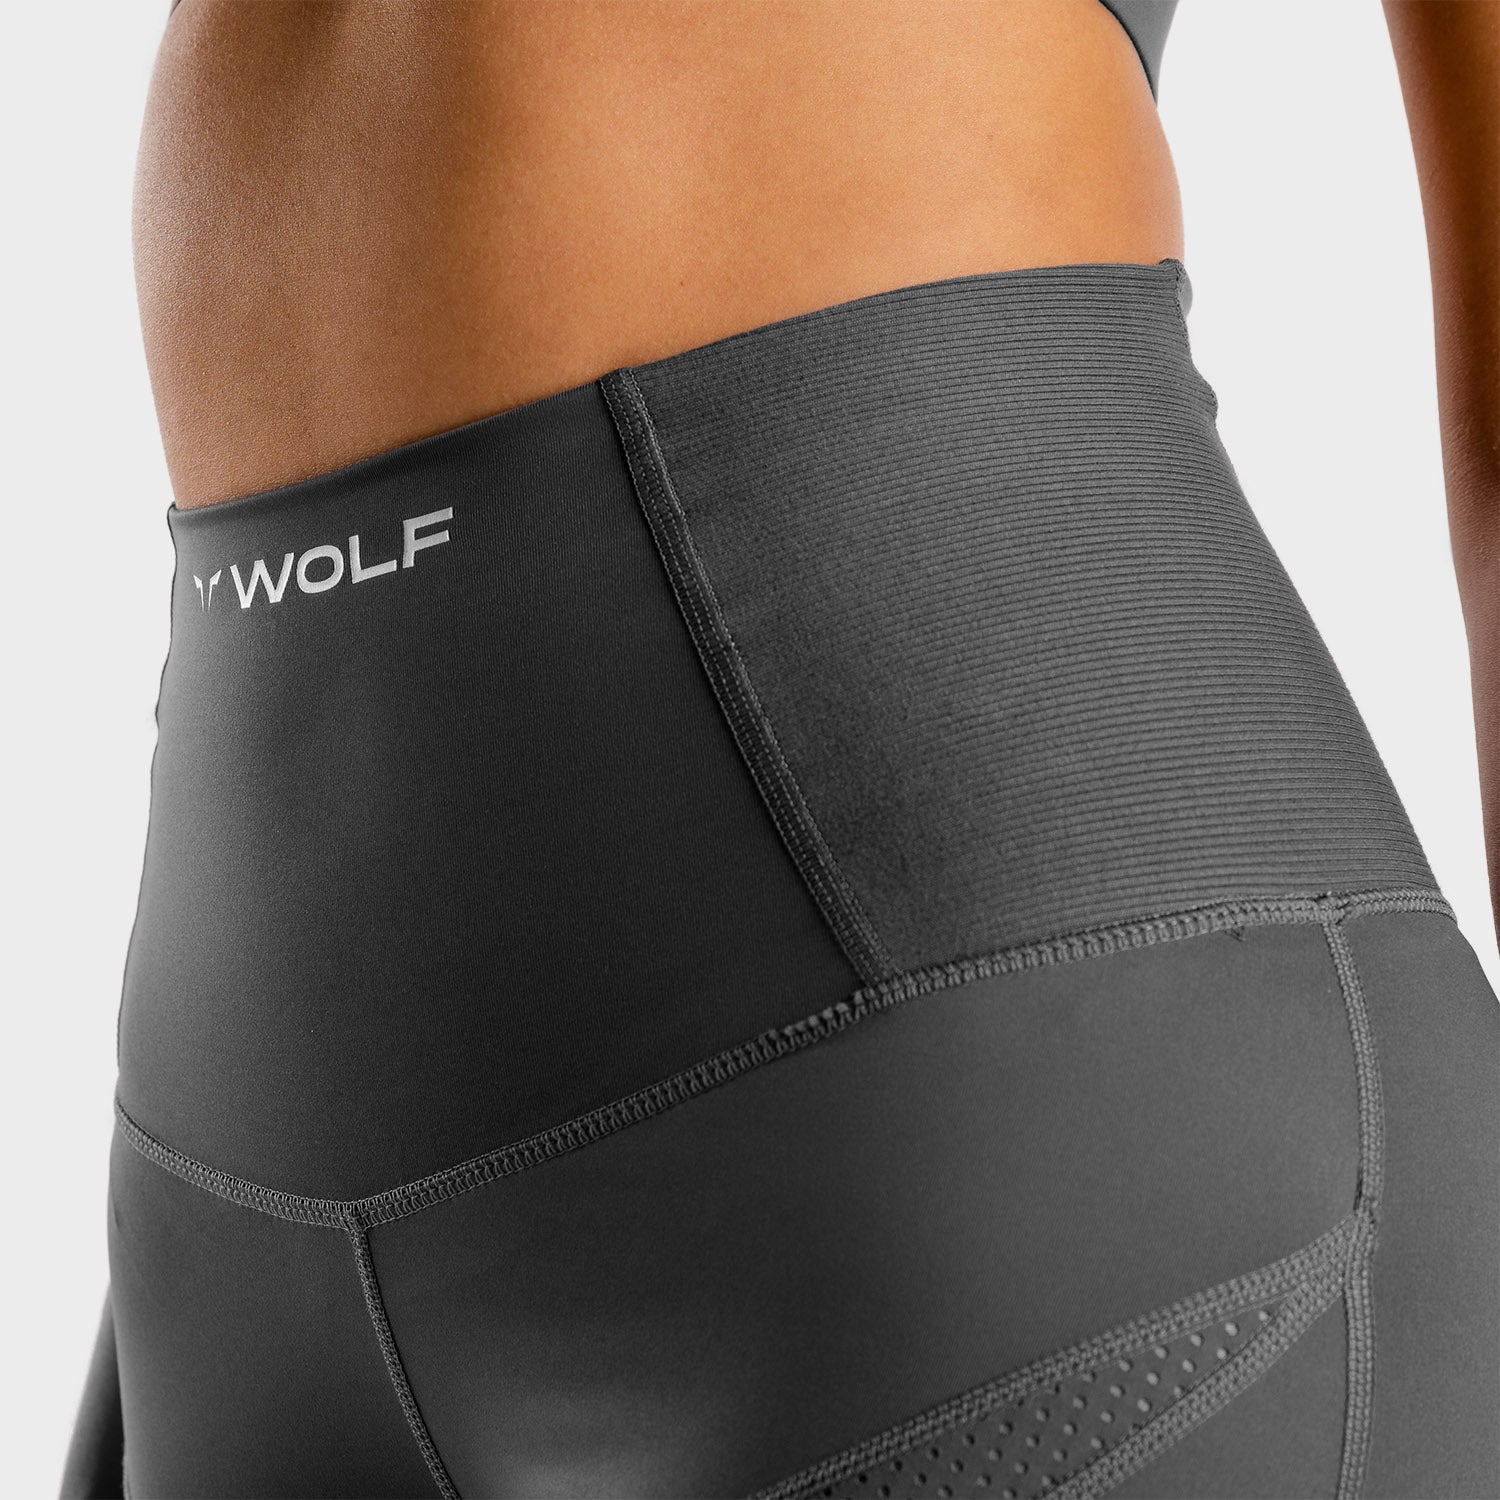 squatwolf-gym-leggings-for-women-wolf-leggings-graphite-workout-clothes